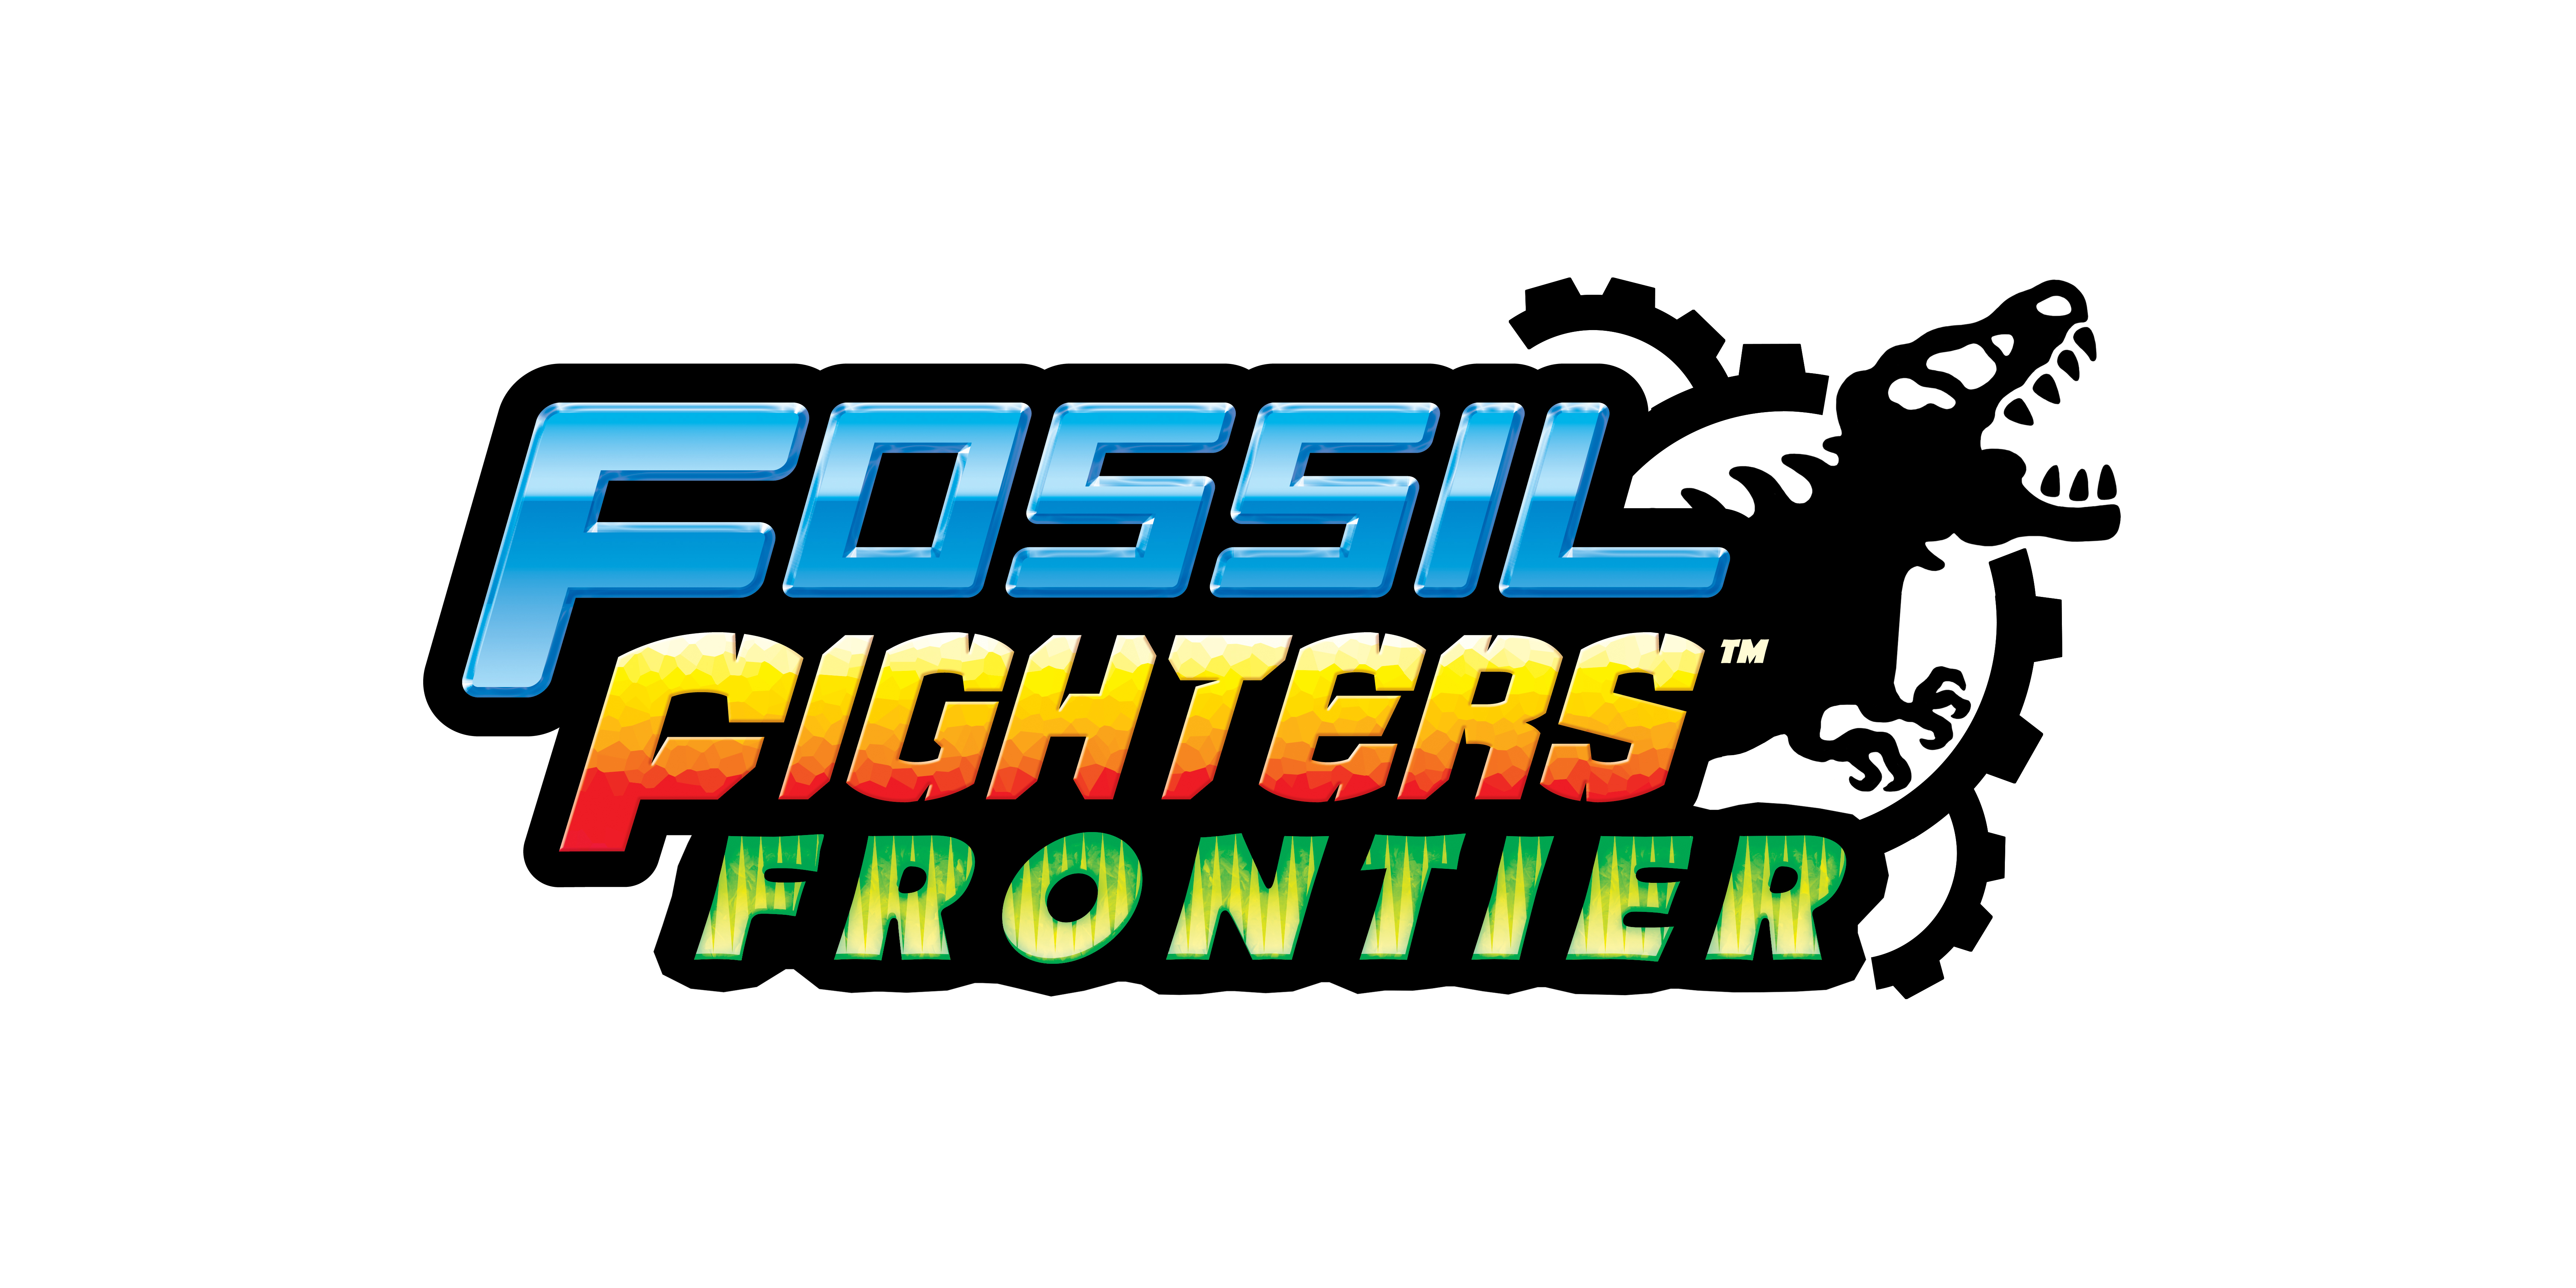 Repeat Unearth Extreme Adventure In Fossil Fighters Frontier For Nintendo 3ds Business Wire